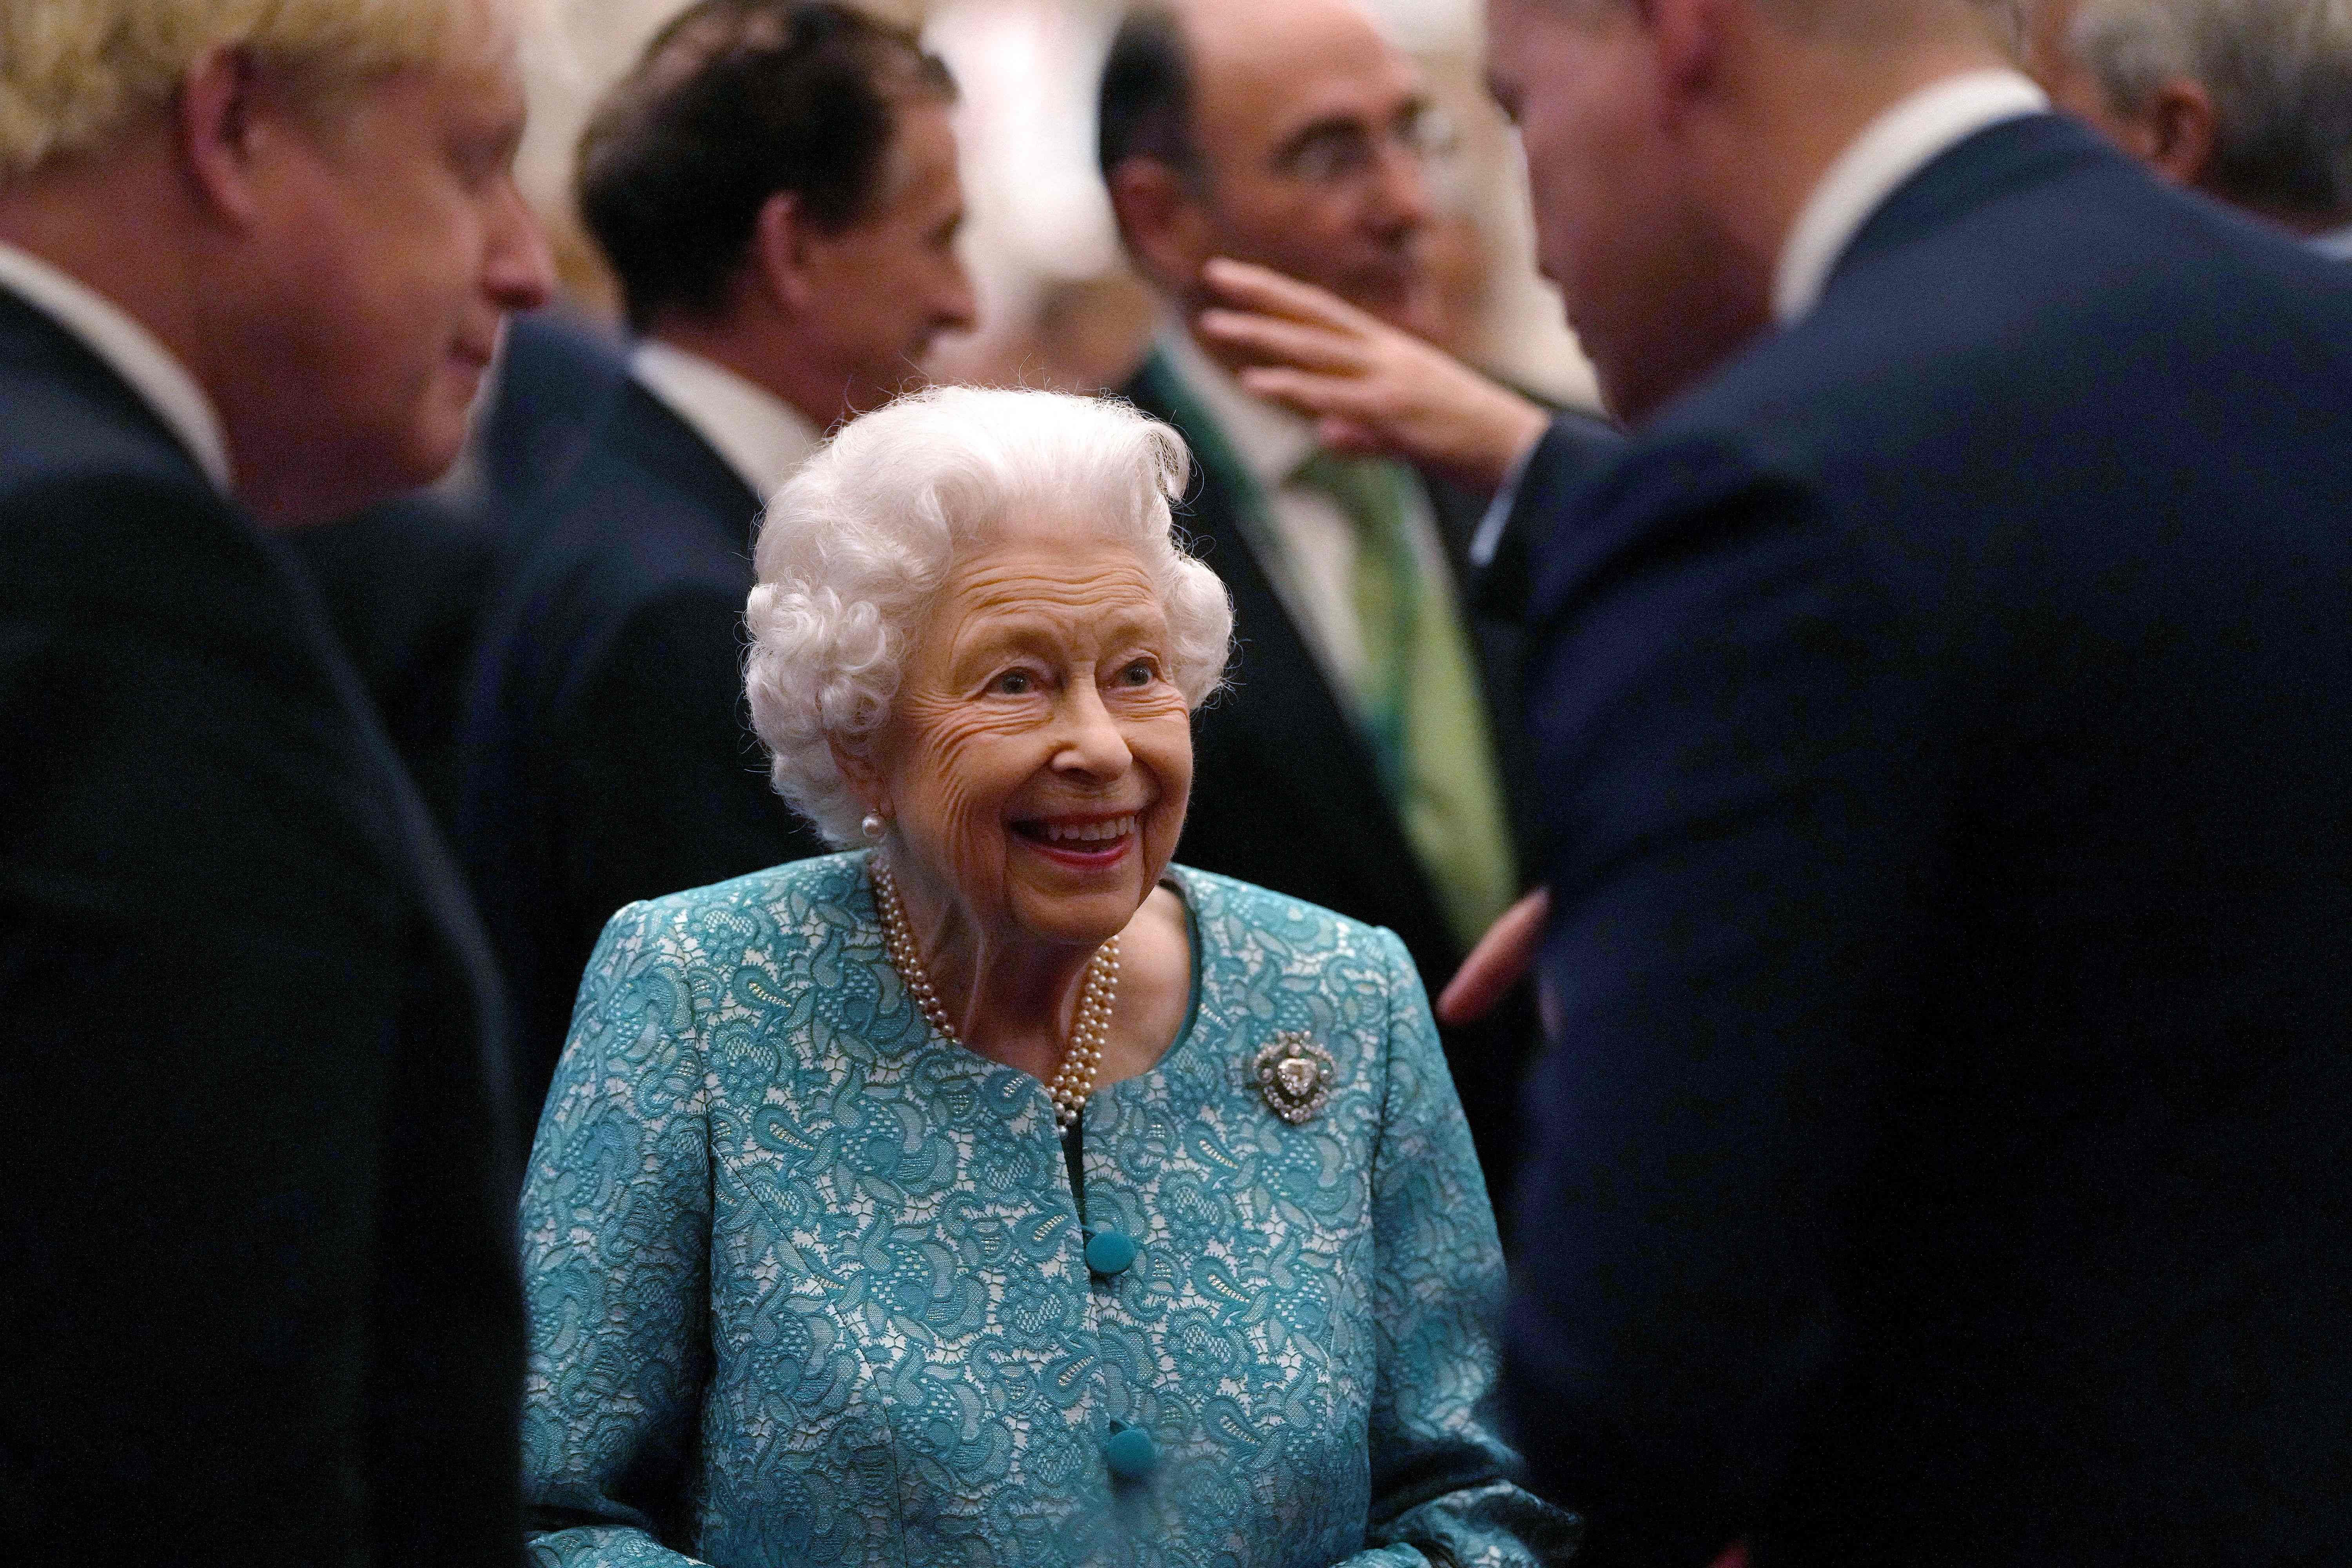 The Queen greets guests including the PM at Windsor Castle earlier this month